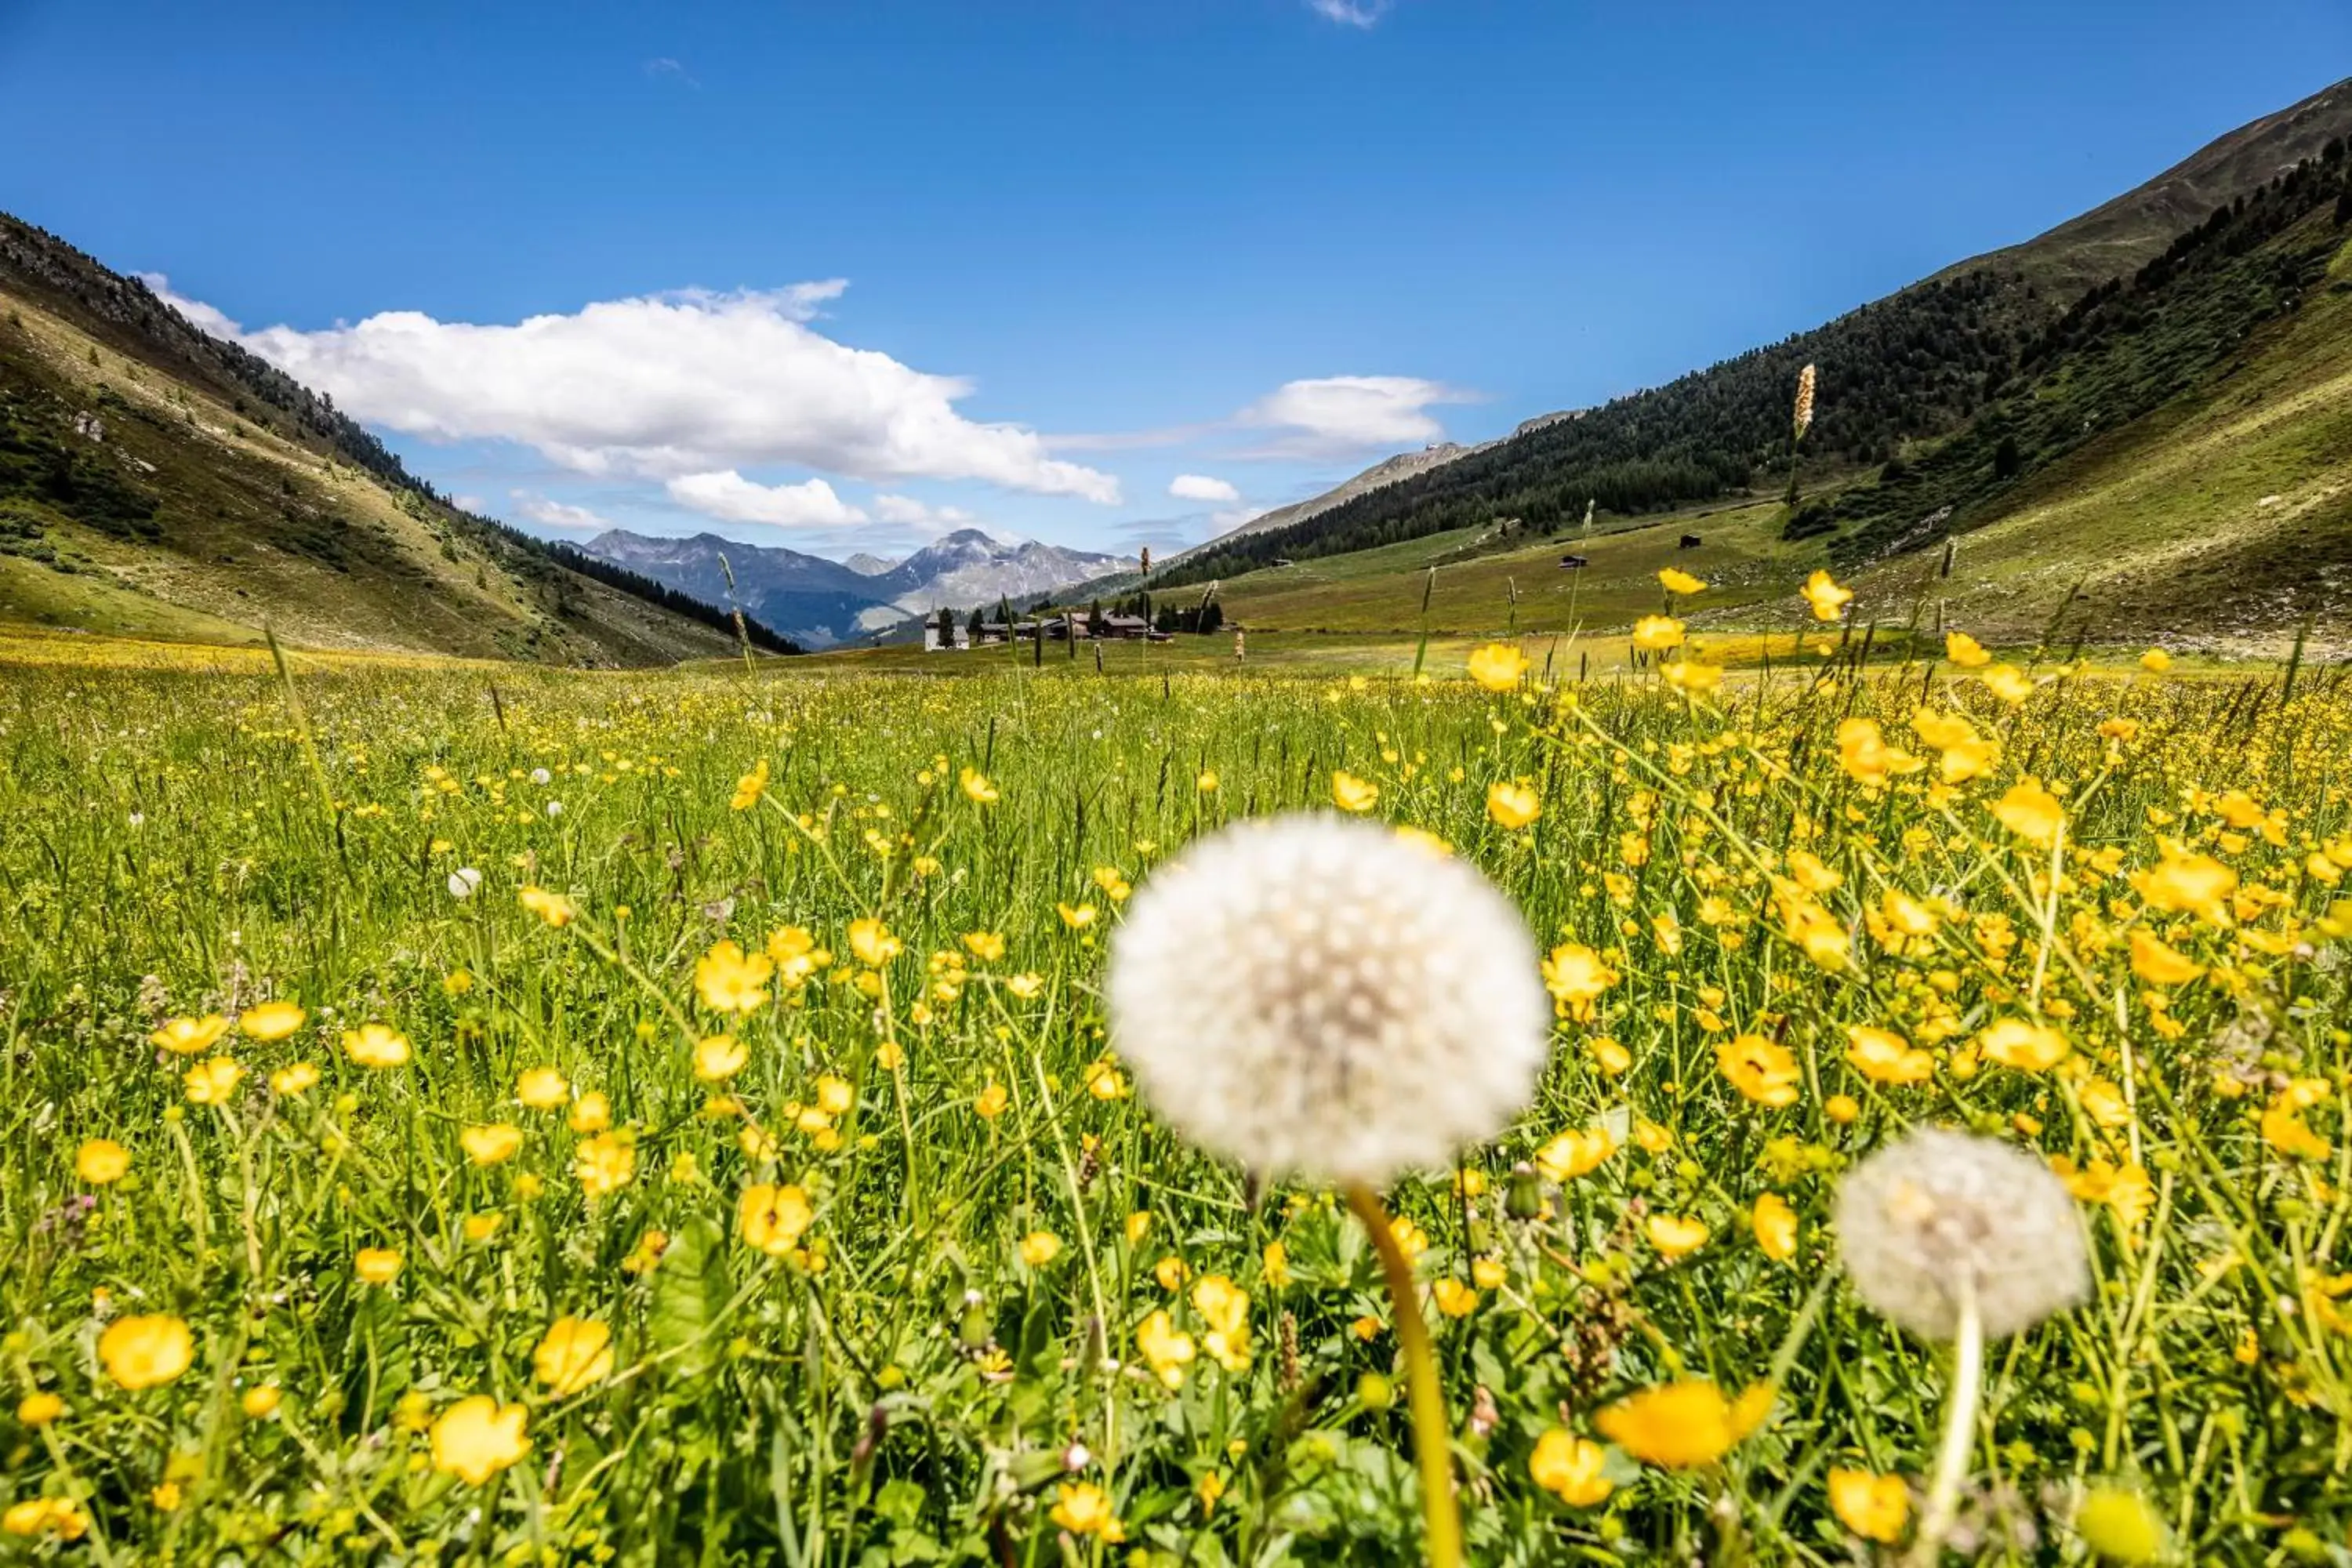 Natural landscape in Hotel Piz Buin Klosters